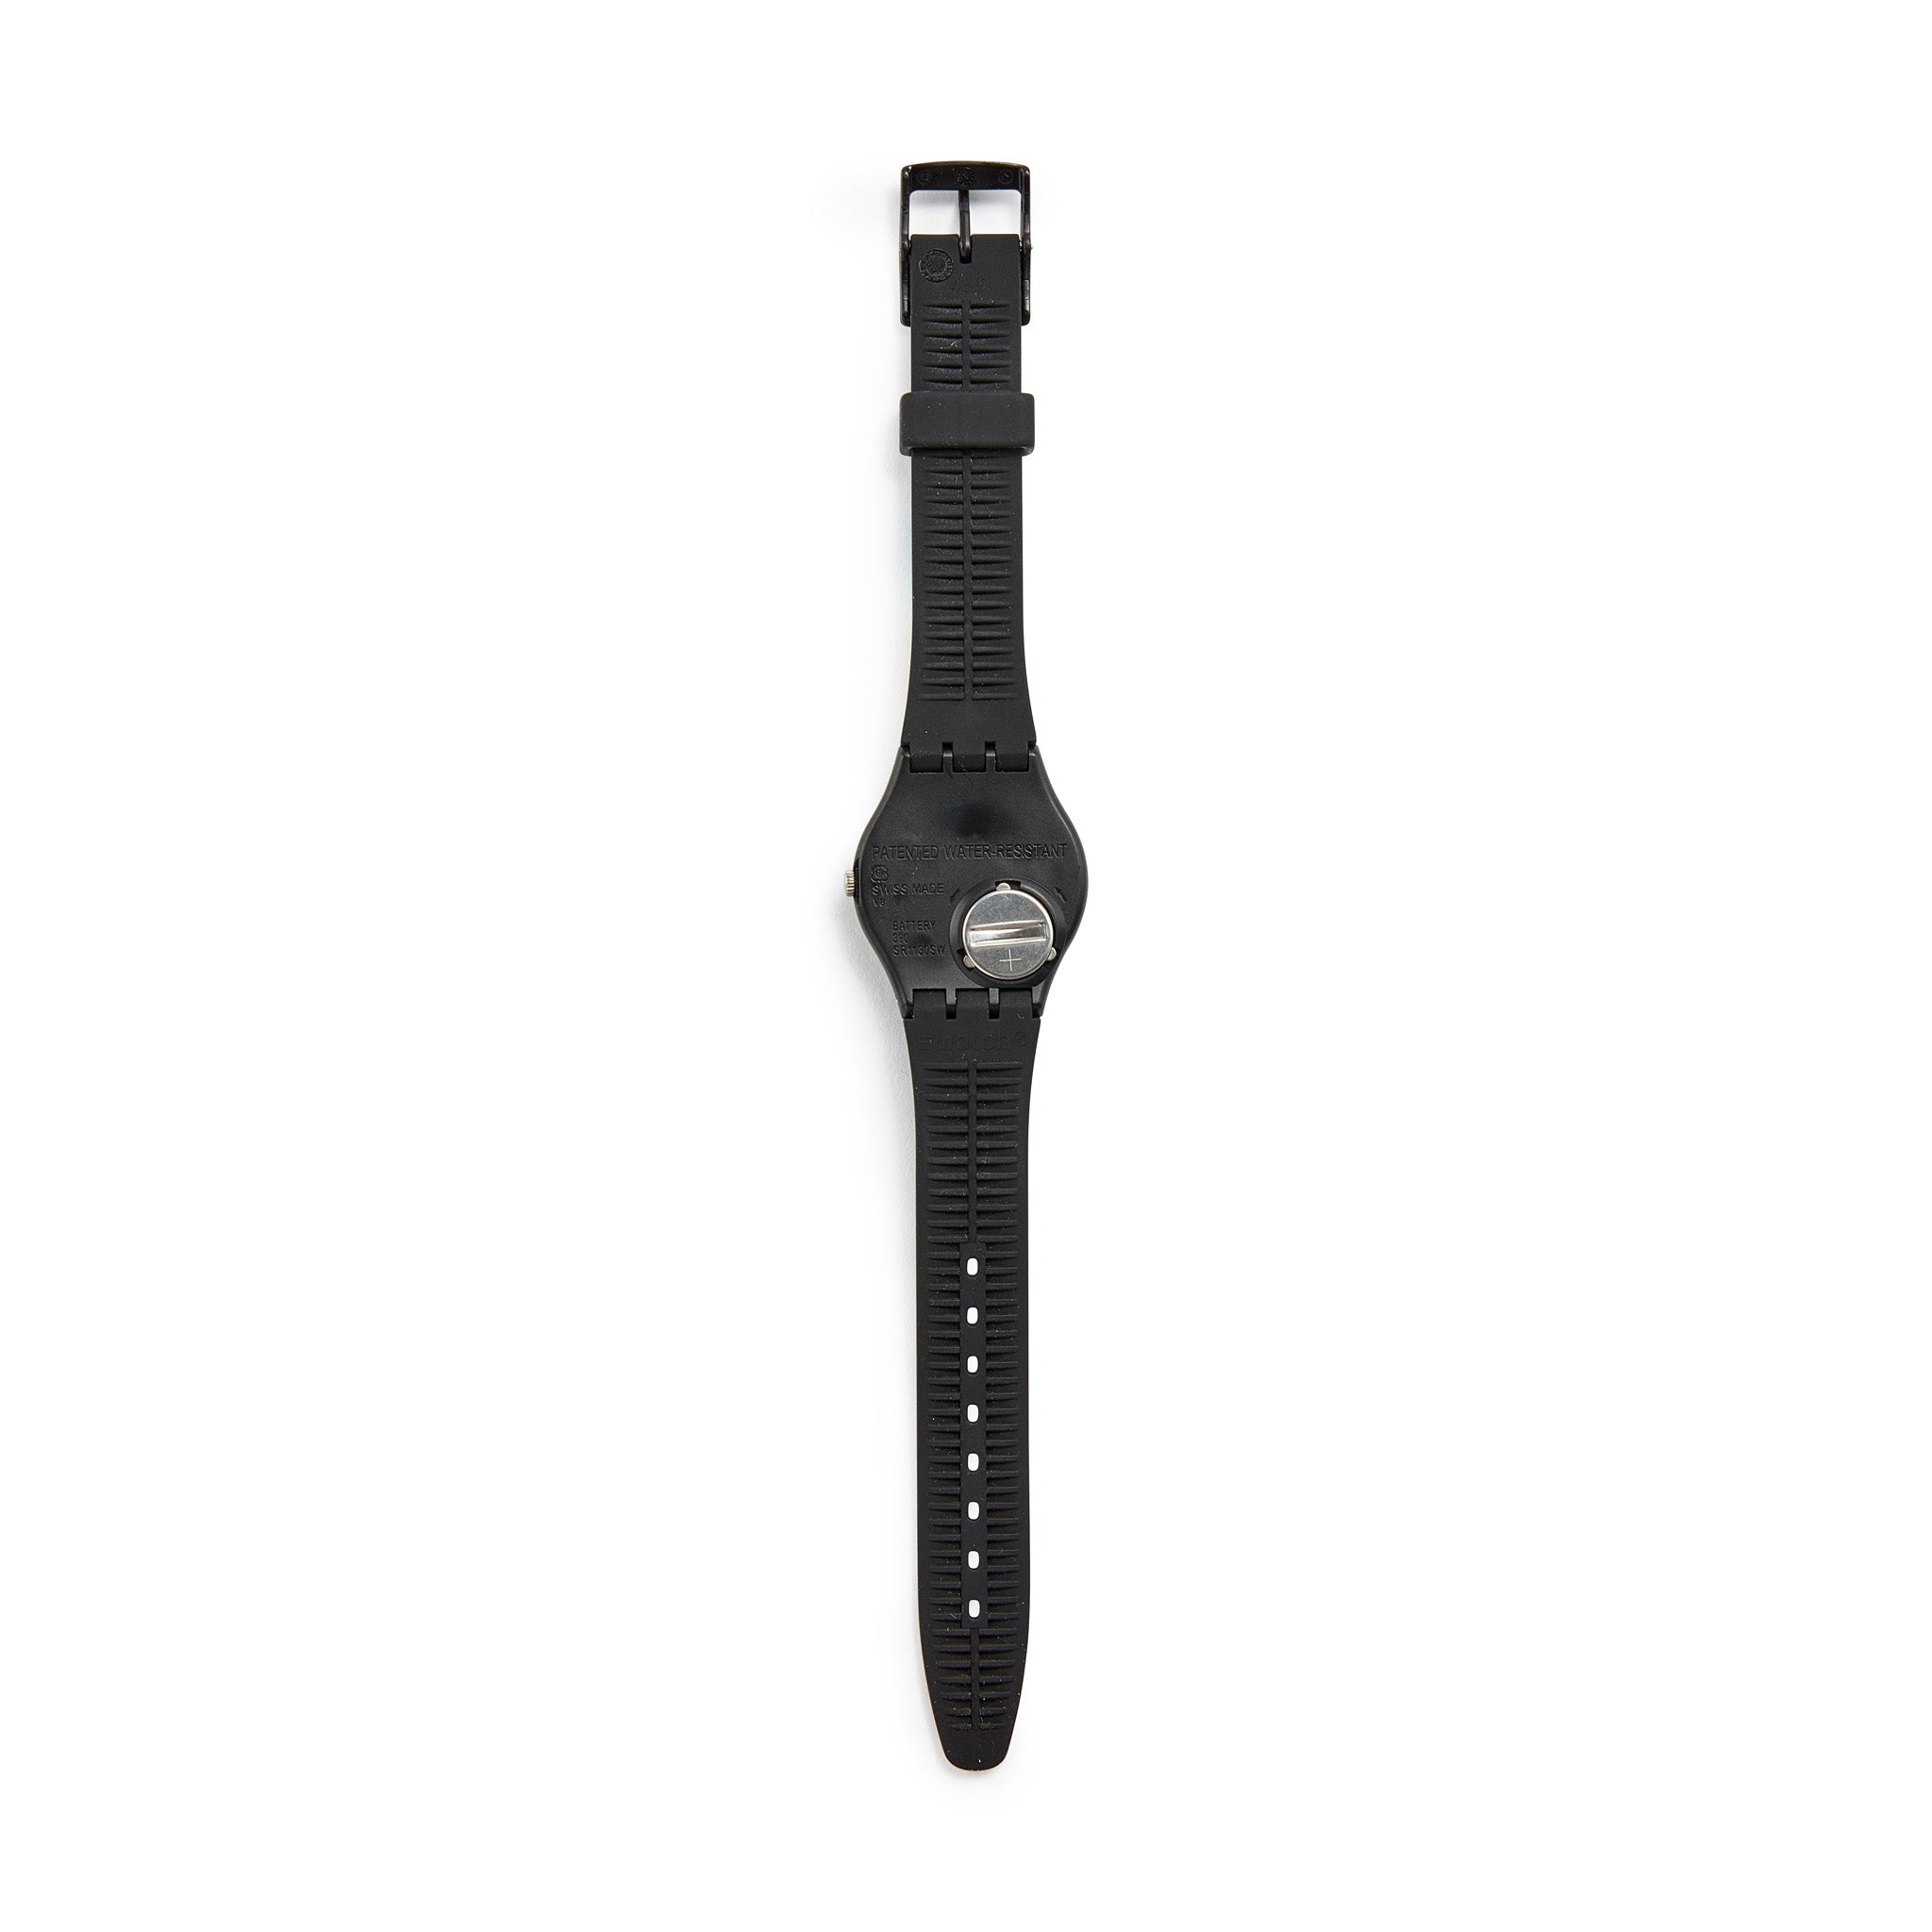 Swatch x MoMA Watches - Rousseau – MoMA Design Store